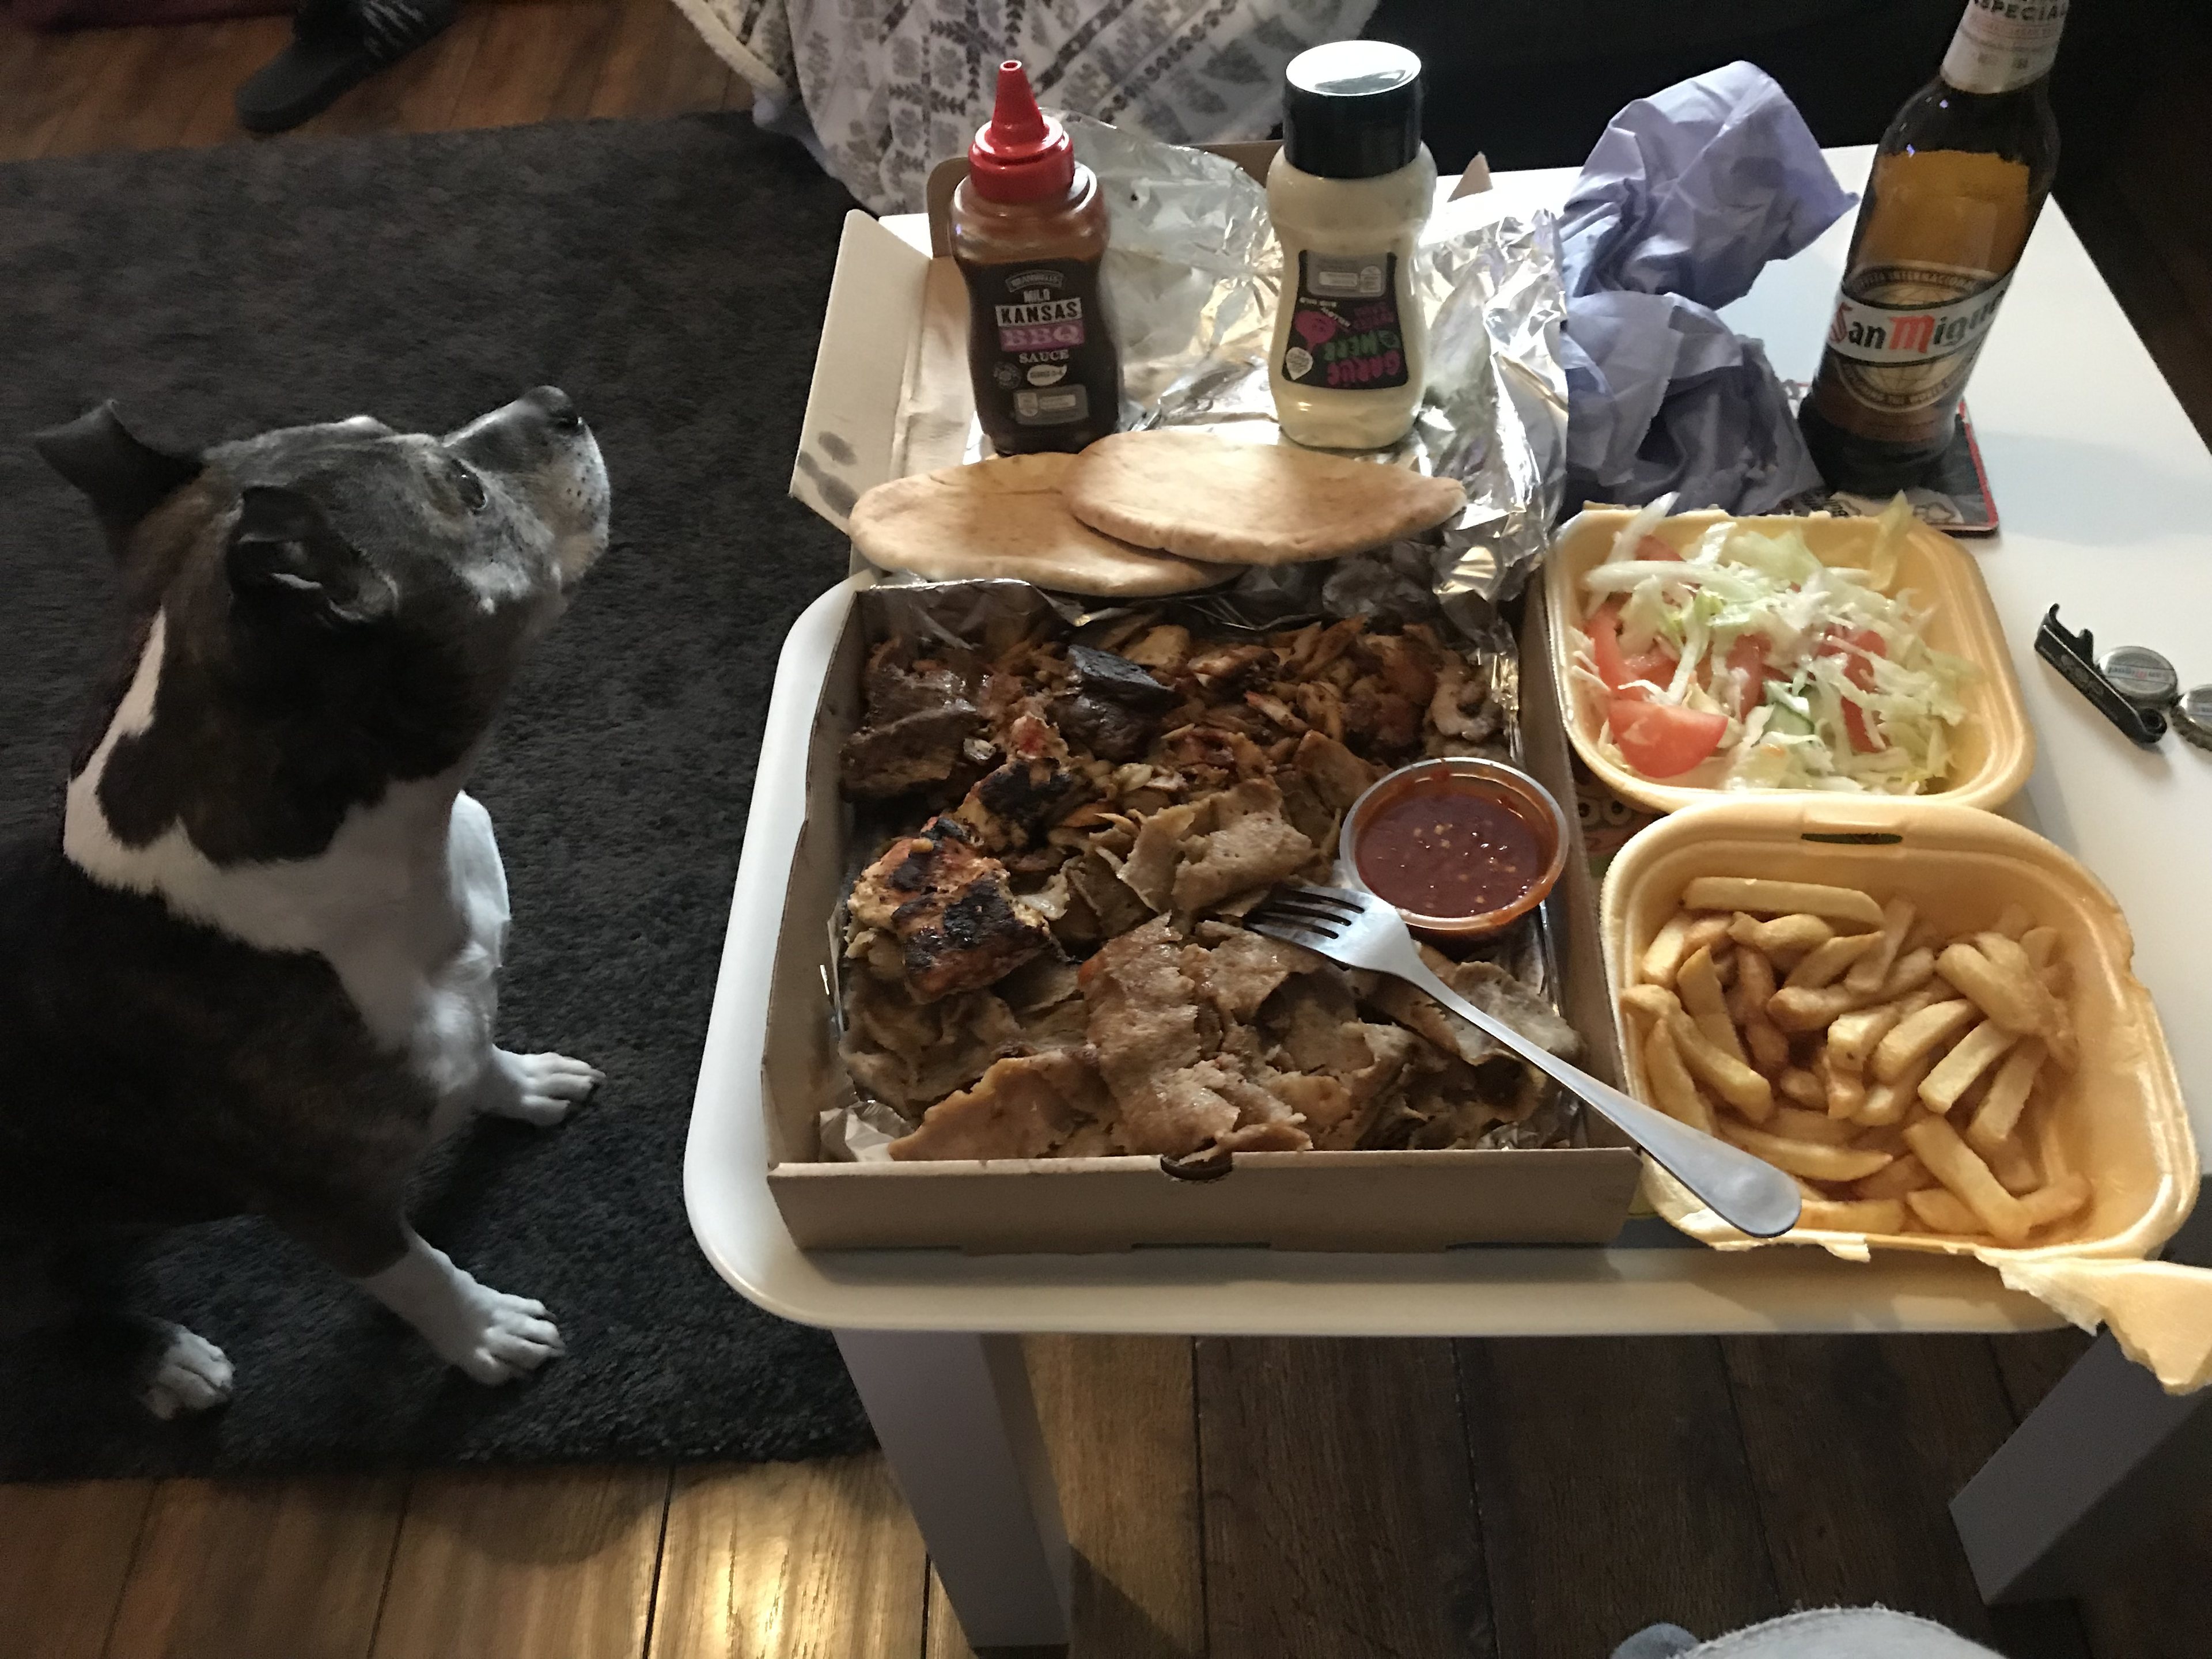 Dirty Takeaway Pictures Volume 3 - Page 463 - Food, Drink & Restaurants - PistonHeads